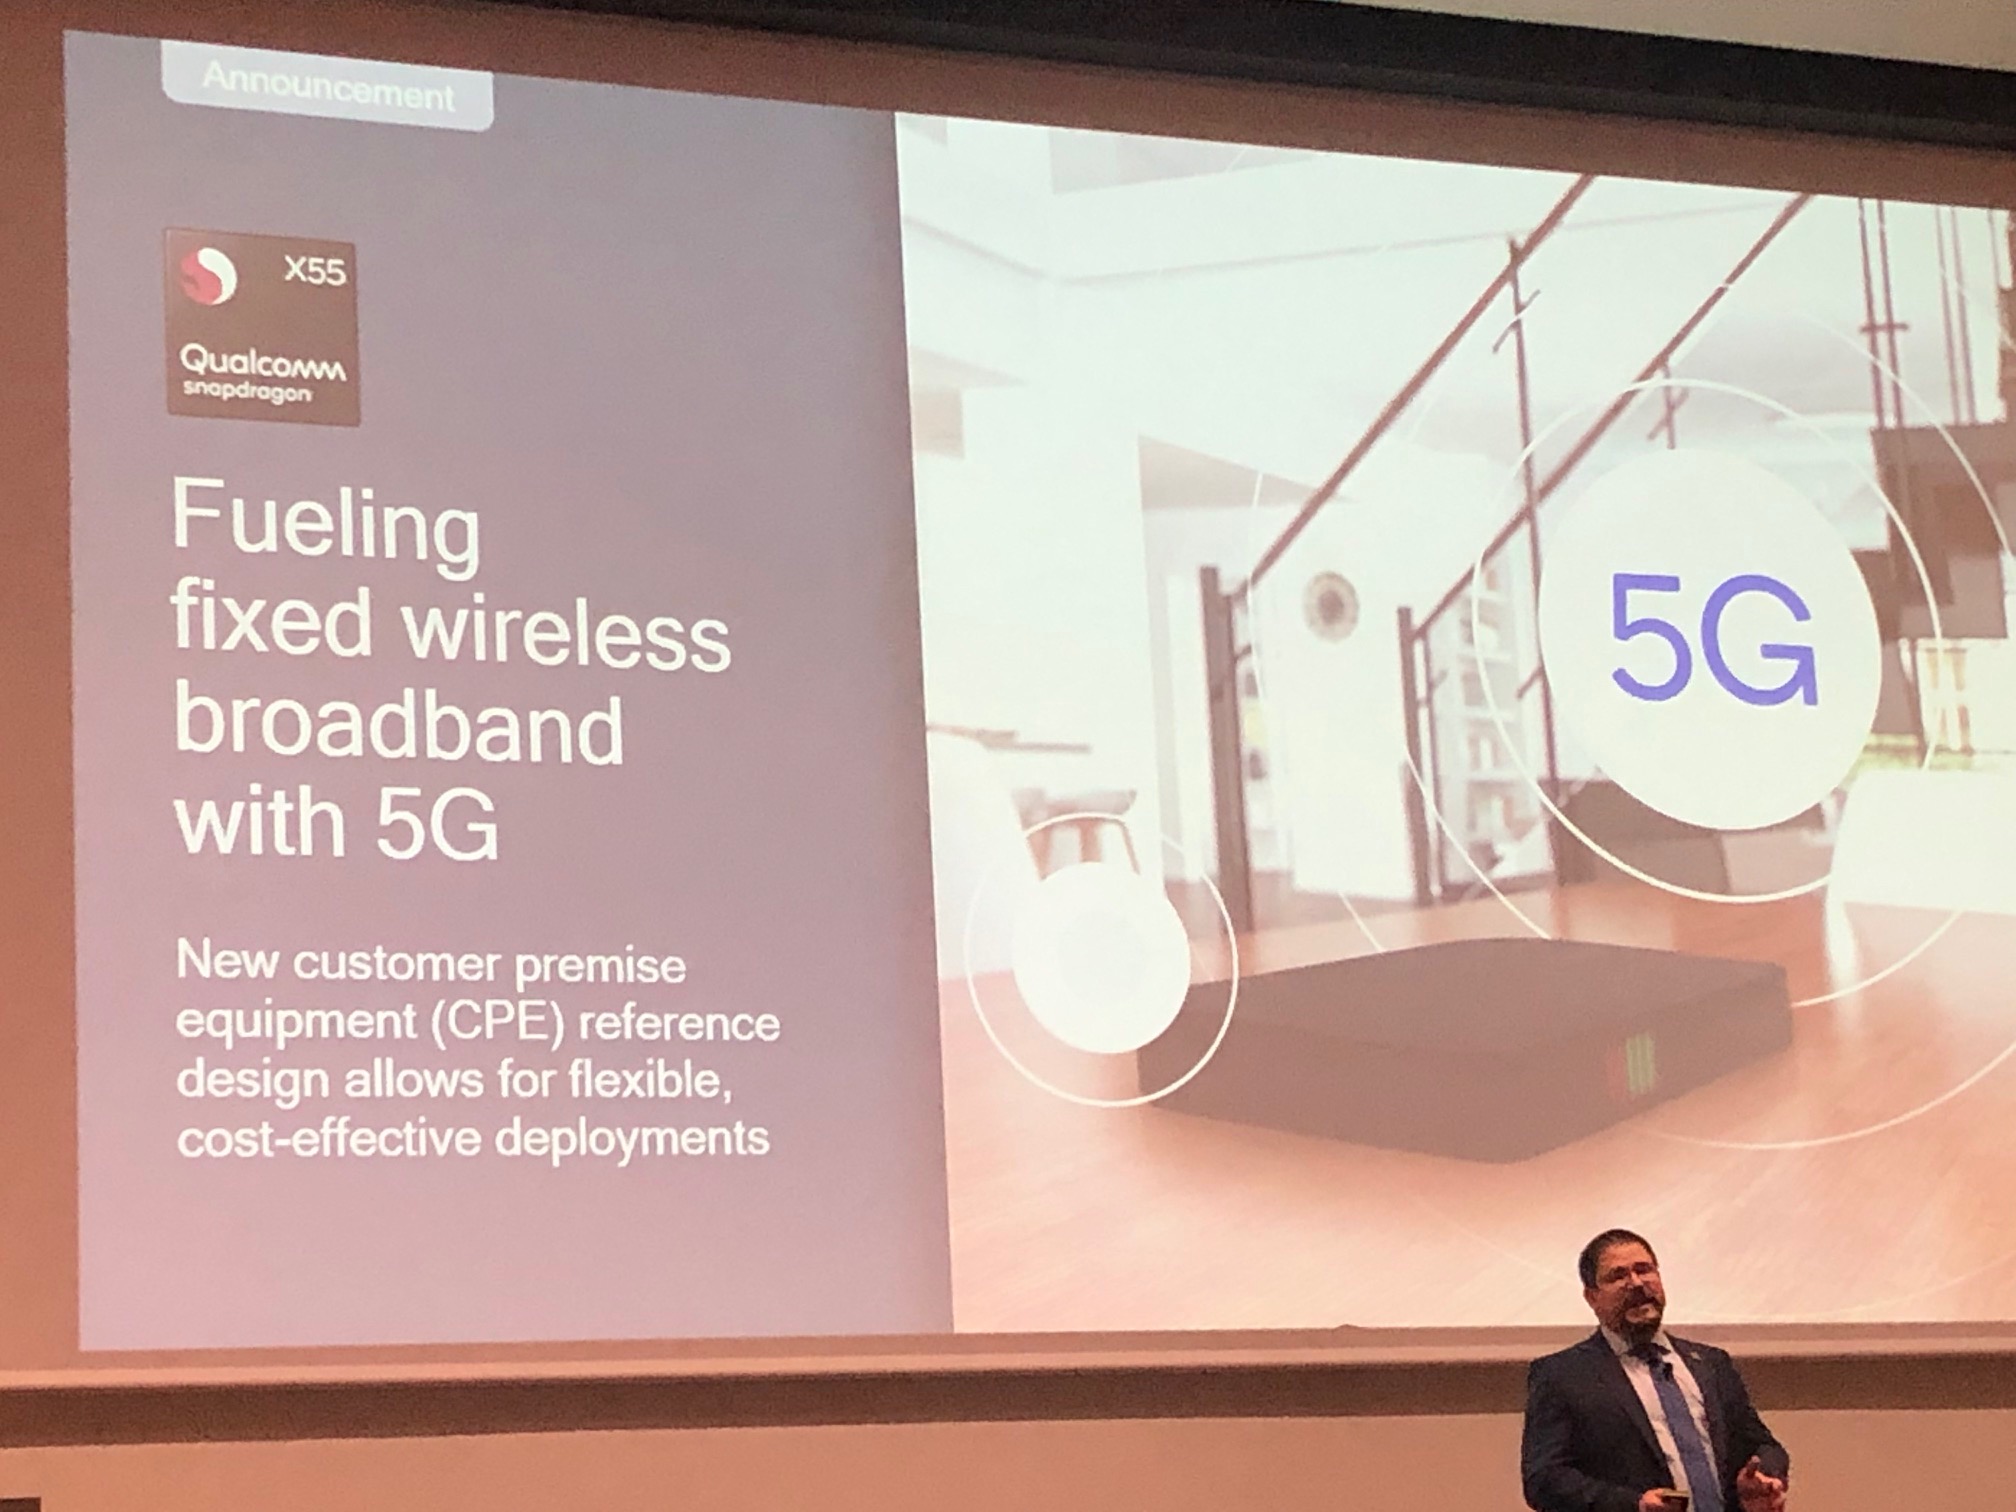 jammer kit lowes new , Qualcomm Debuts CPE Reference Design for Fixed Wireless 5G Broadband